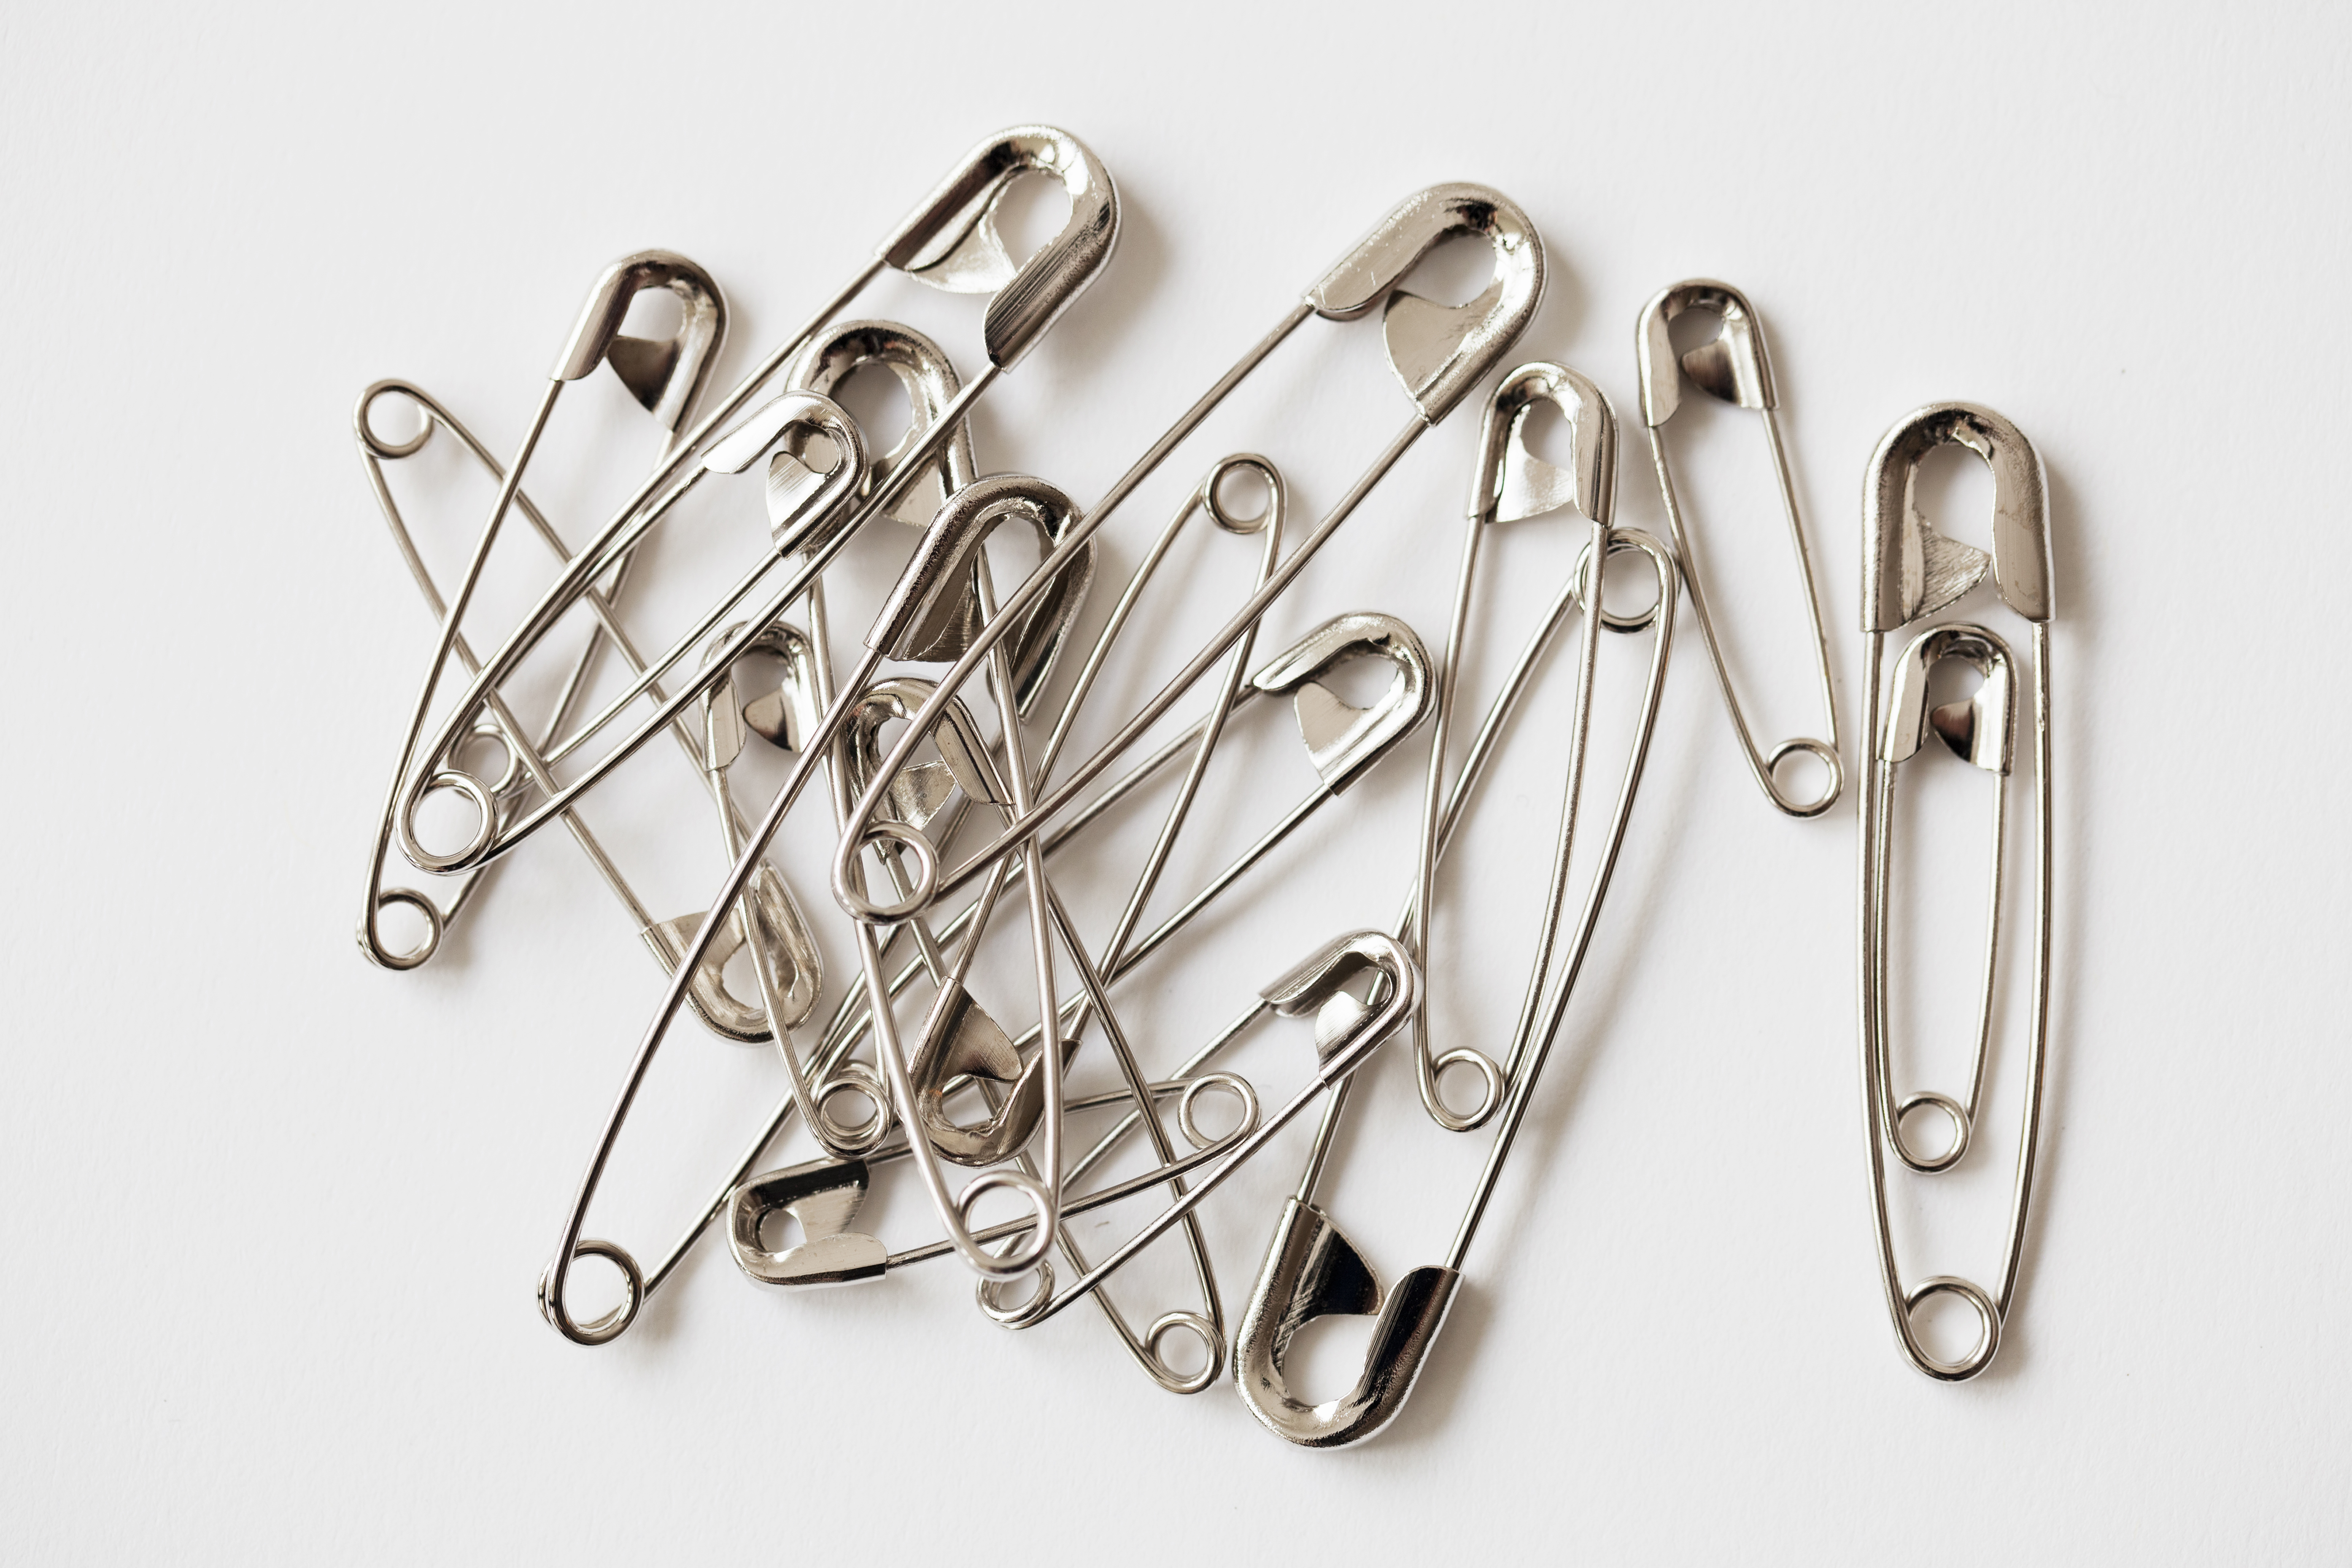 10 Unexpected Ways to Use Safety Pins